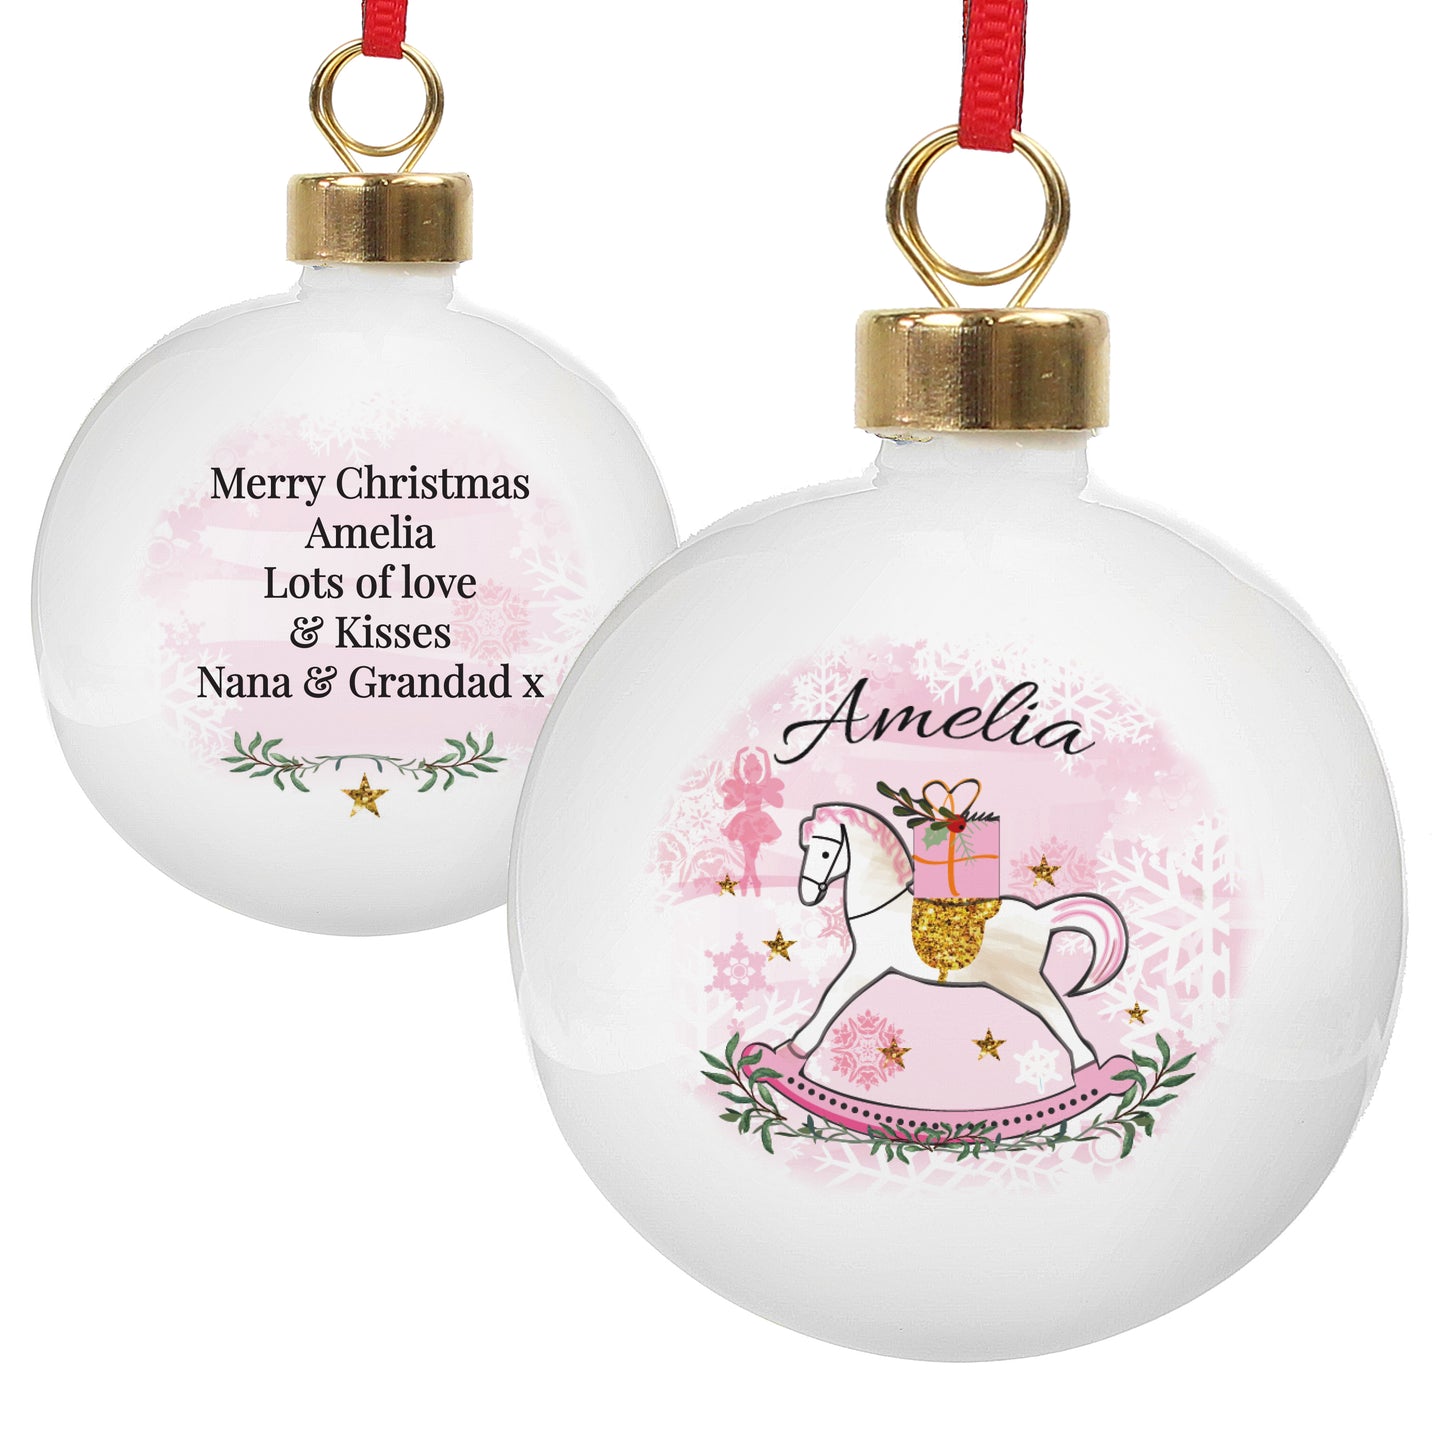 Personalised Ceramic Christmas Rocking Horse Bauble - Available in Pink or Blue